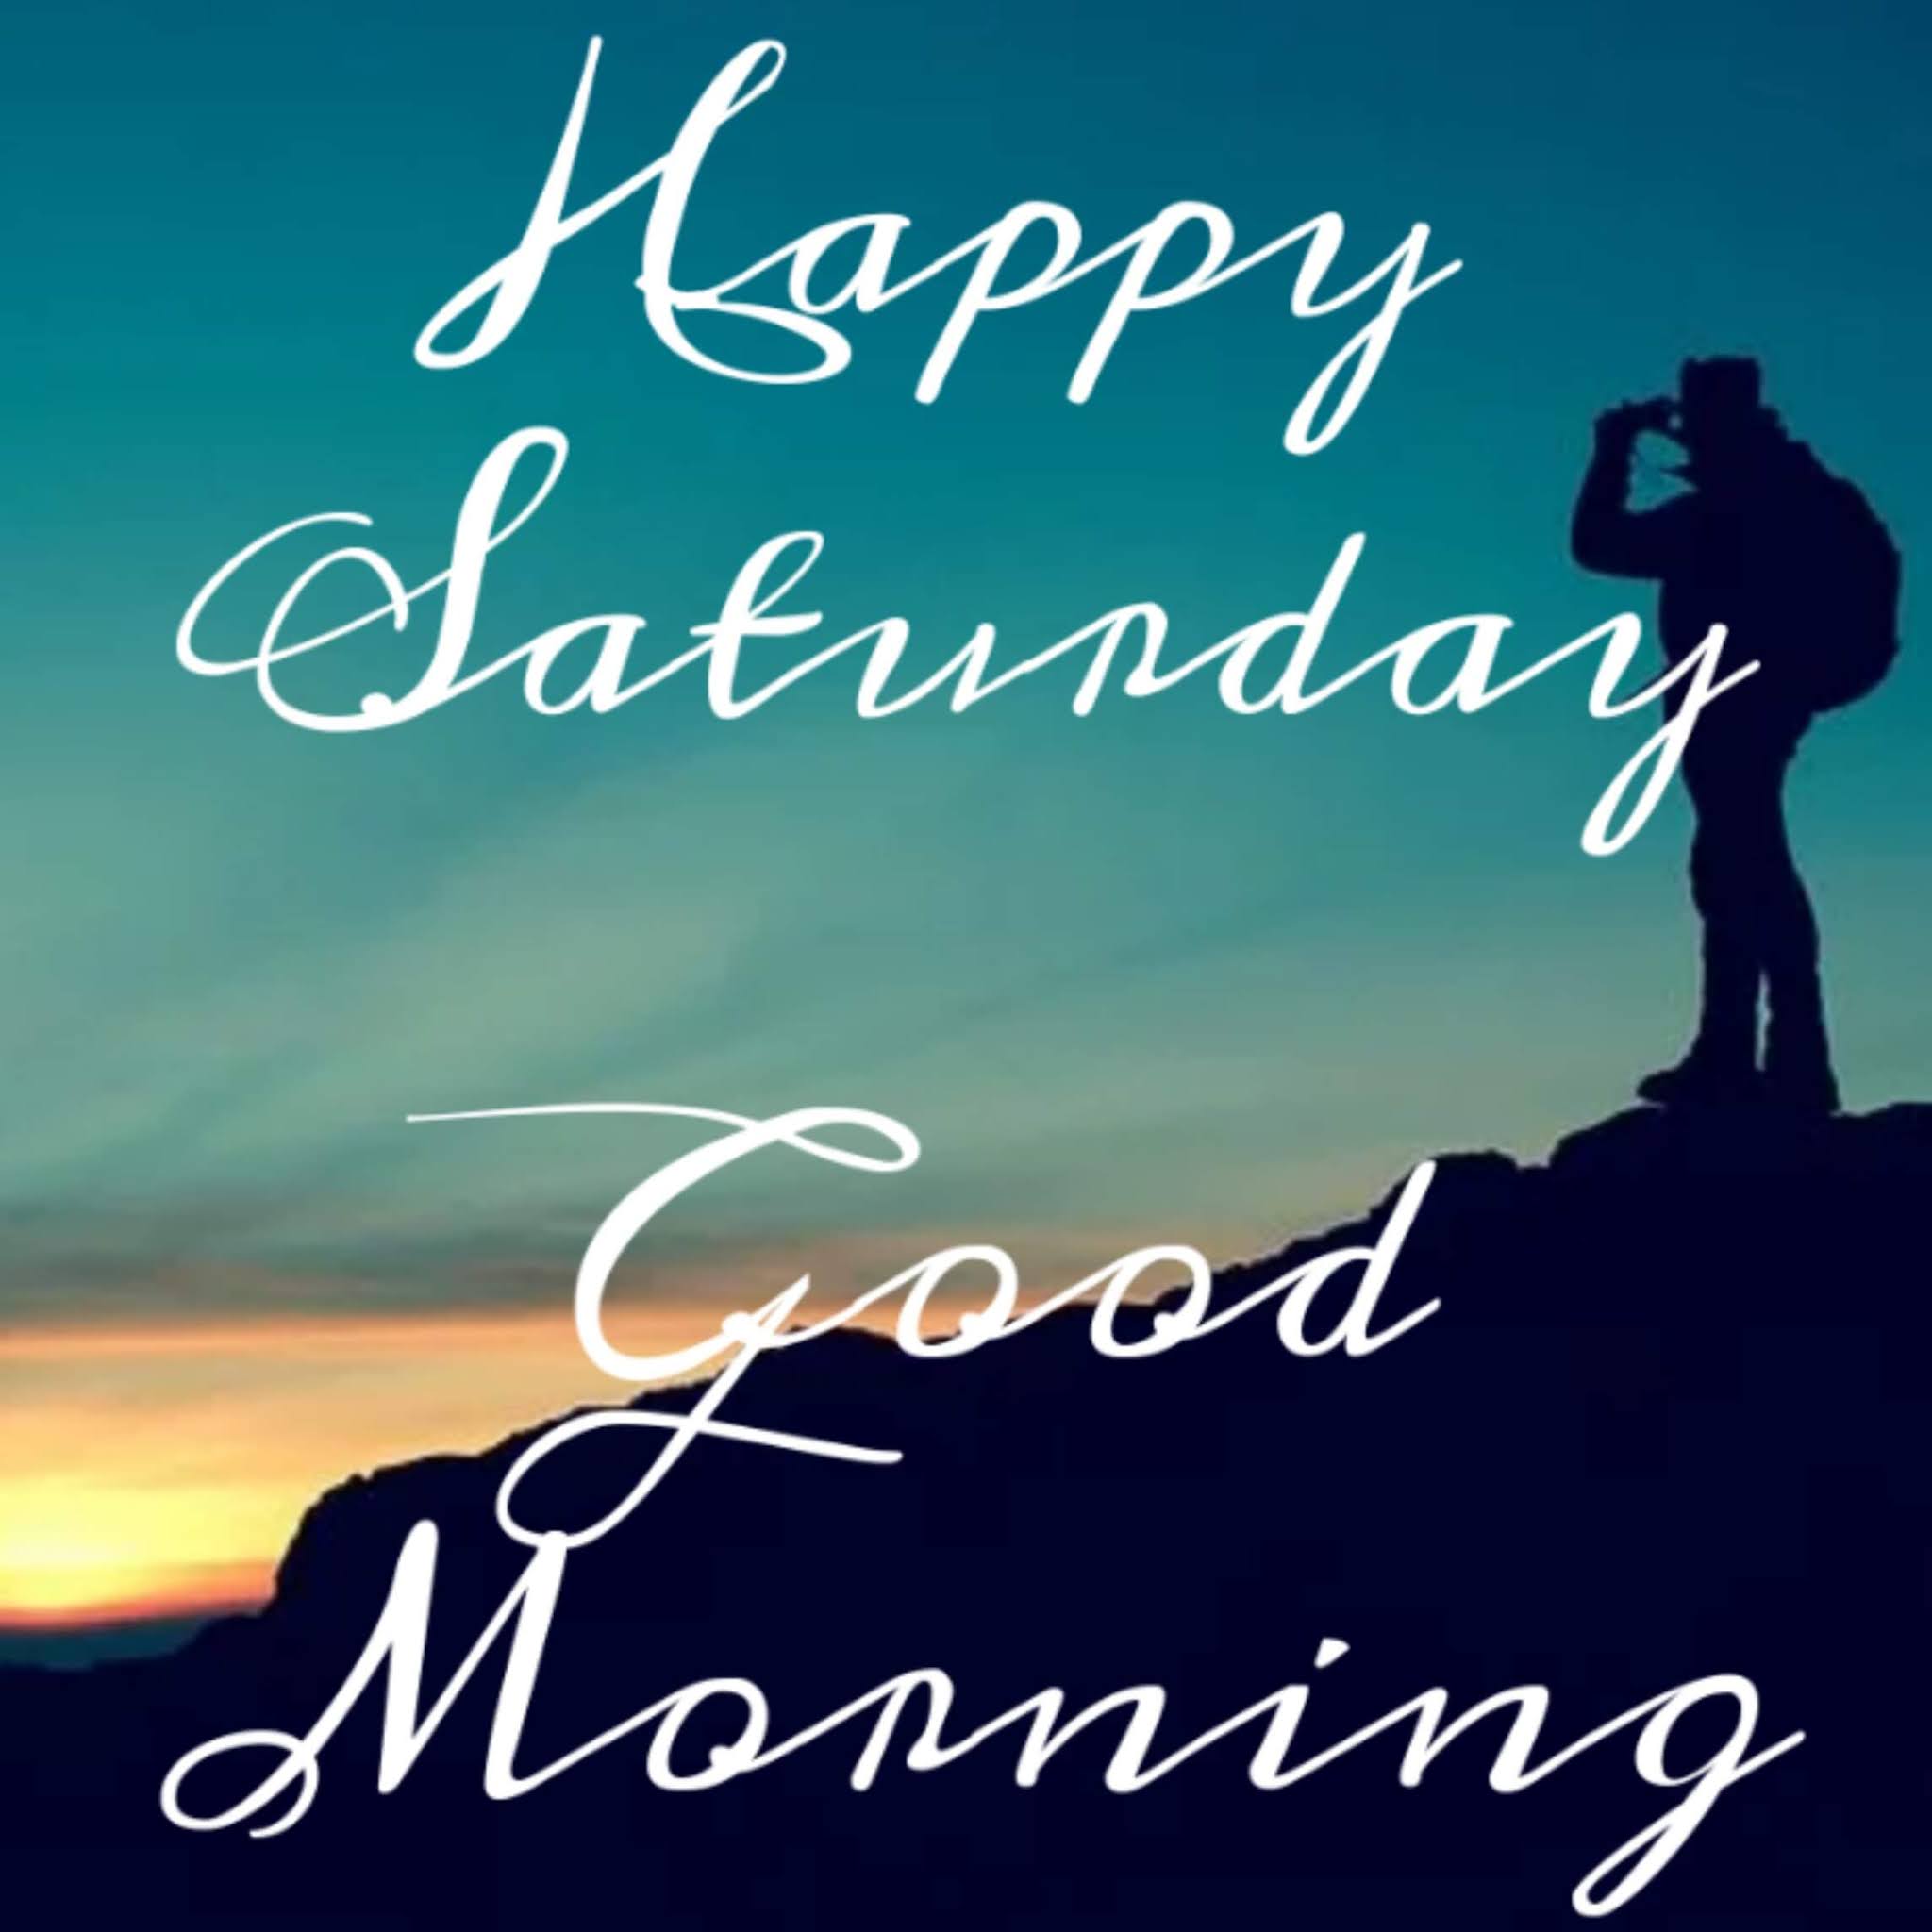 Happy Saturday Hd Pictures For WhatsApp | Good morning happy saturday,  Happy saturday, Good morning cards